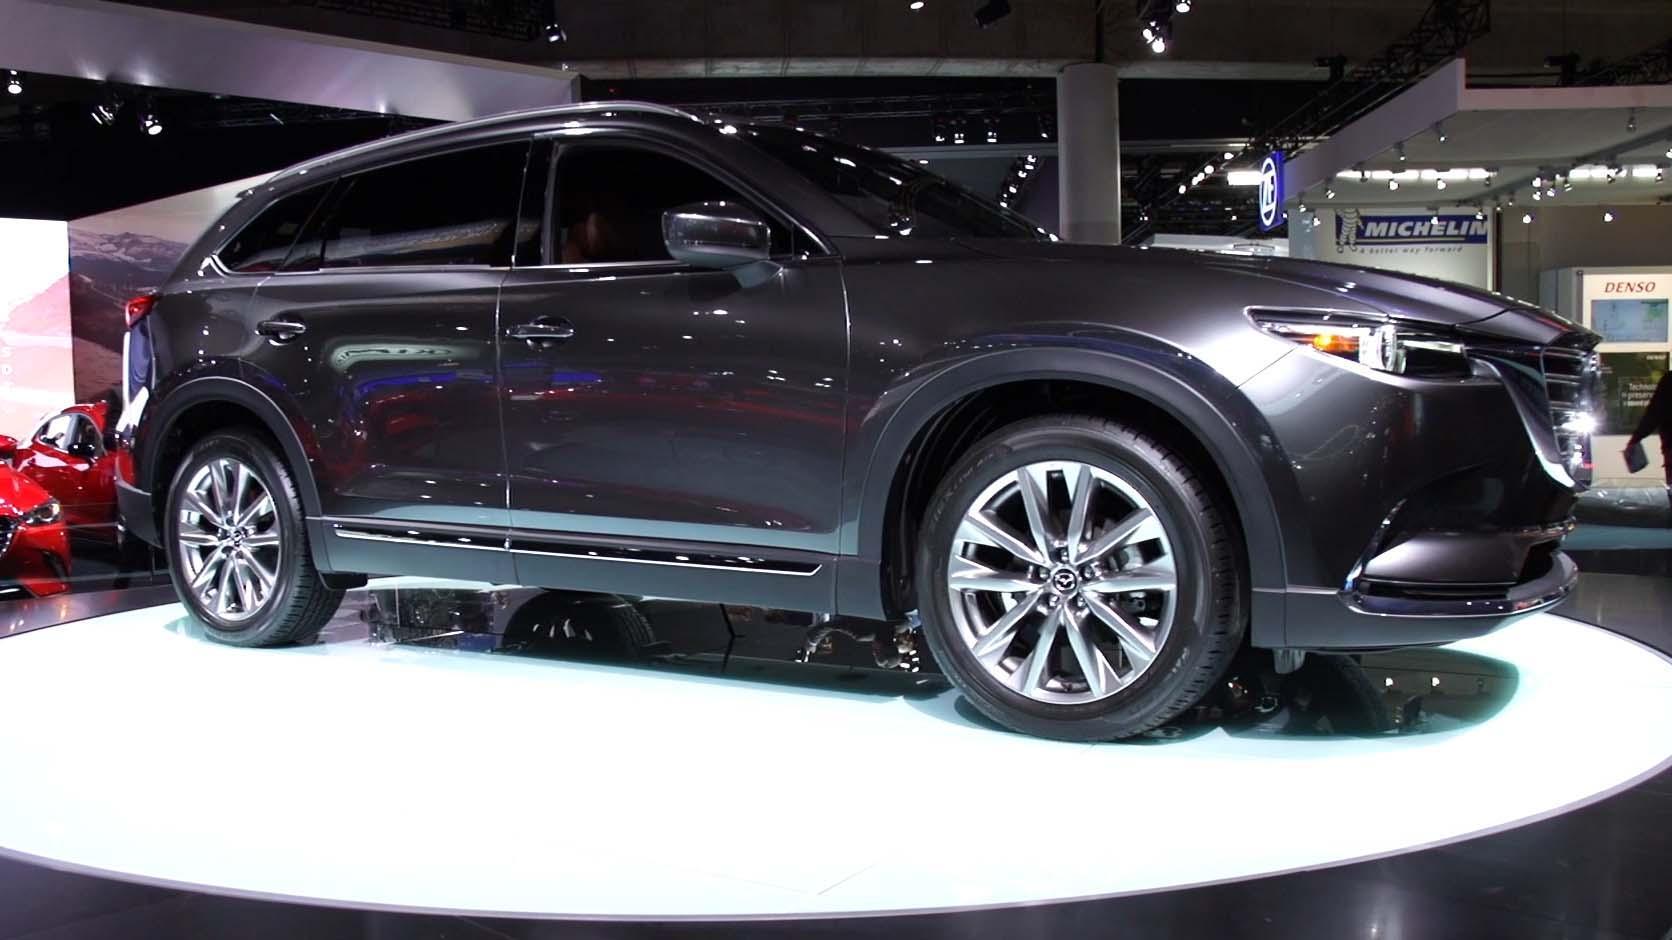 Mazda CX-9 Takes Mazda's Values to a Larger Scale